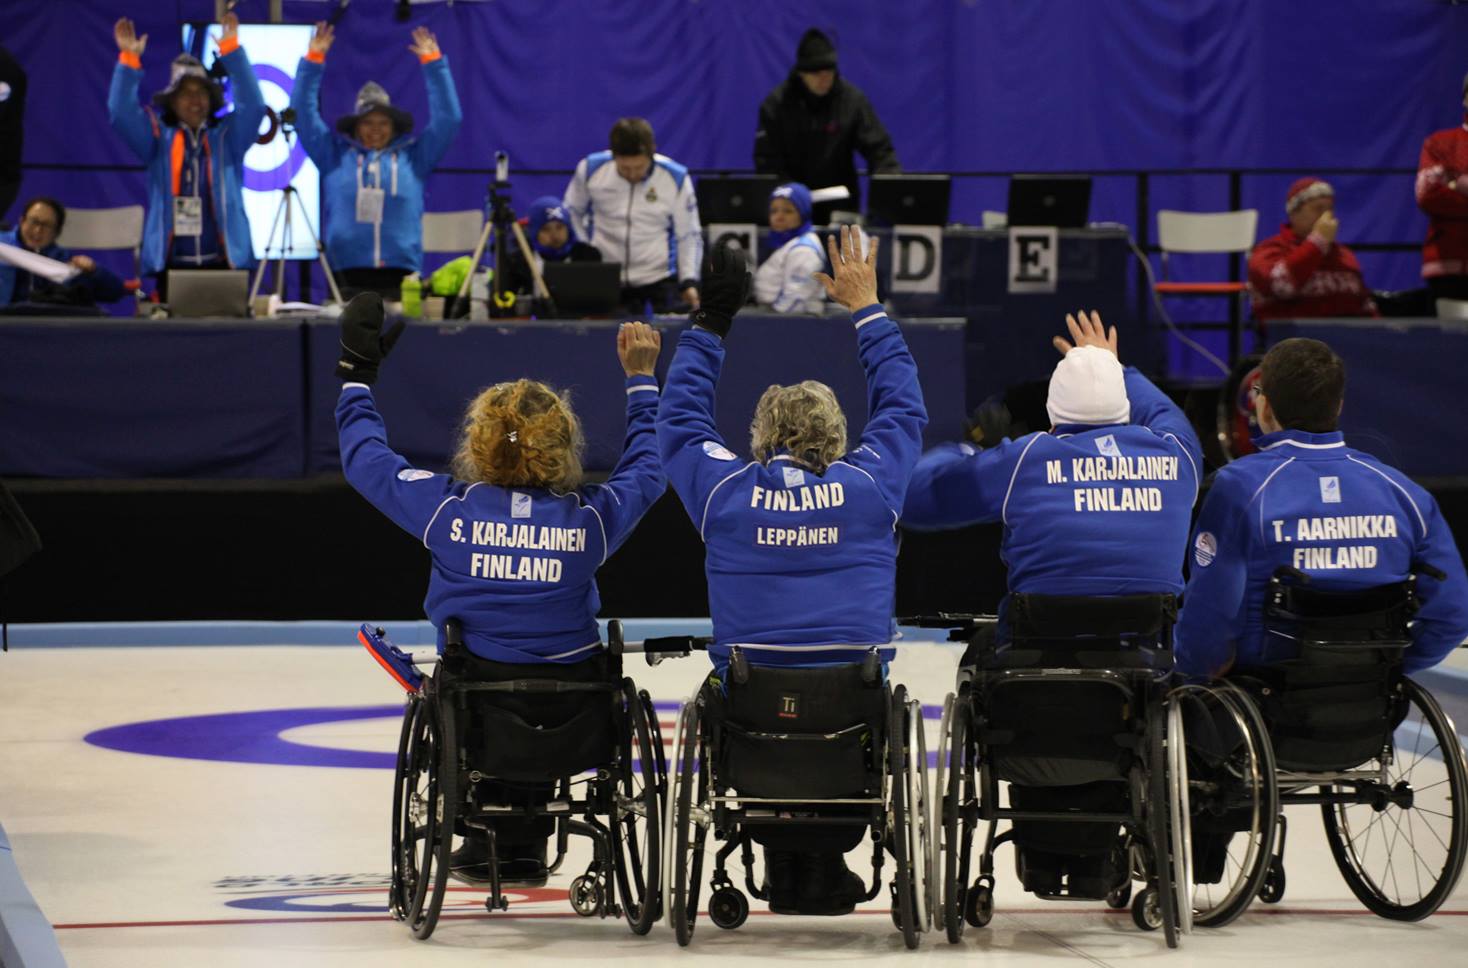 Finland's bronze medal saw them secure their best-ever finish at the World Wheelchair Curling Championship ©WCF/Alina Pavlyuchik